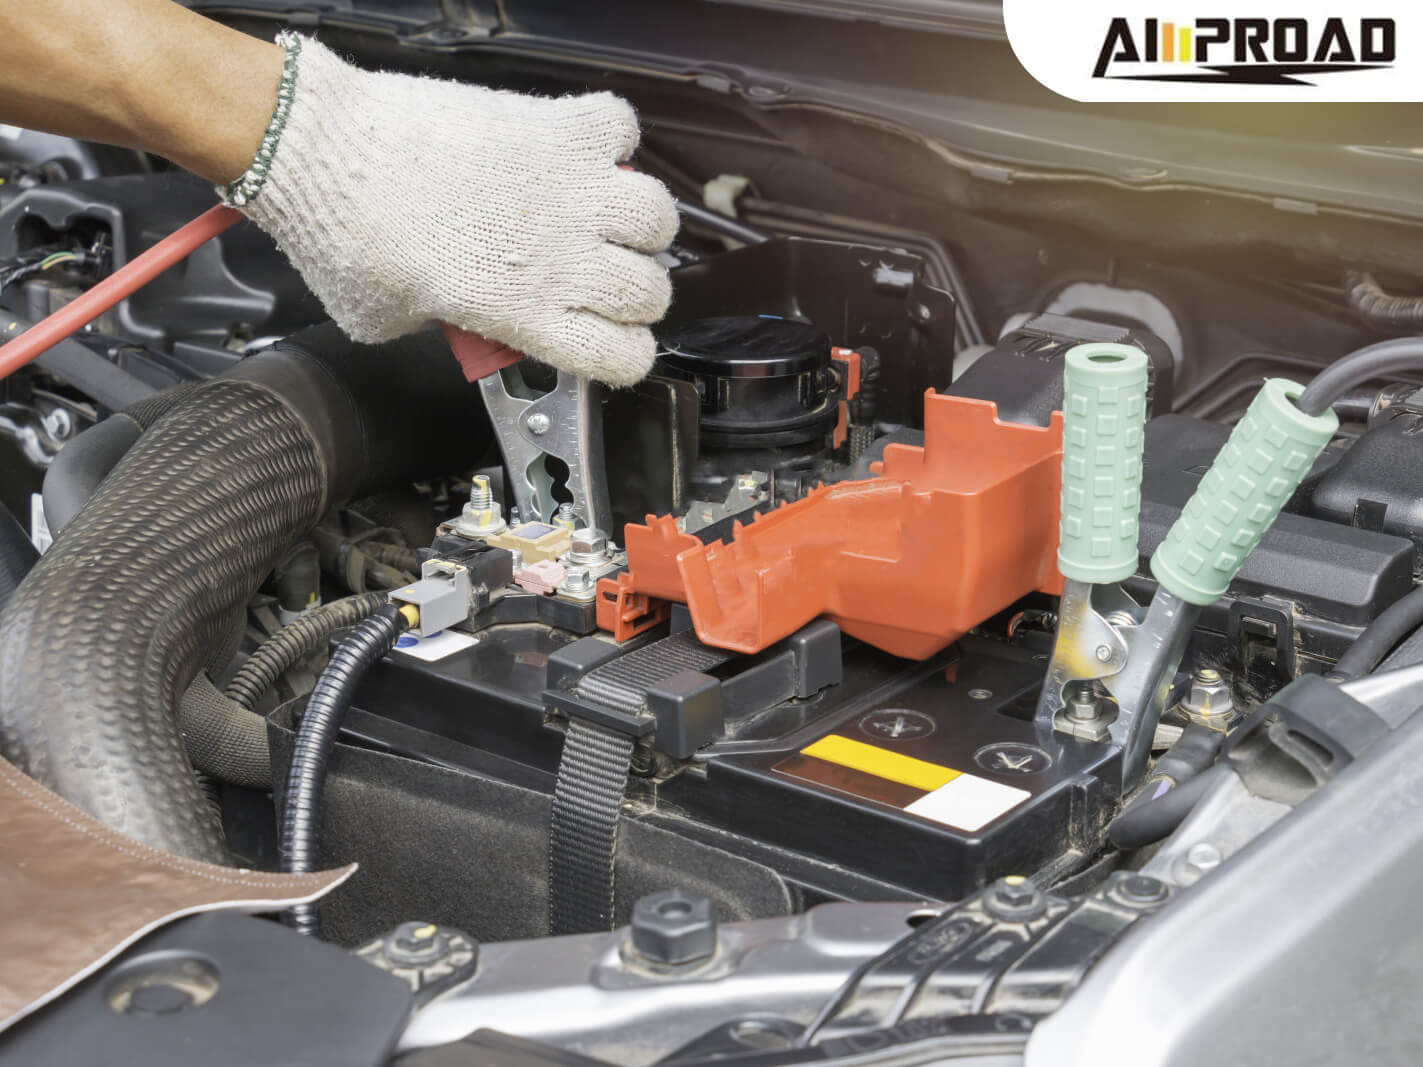 What Are the Main Differences Between Jump Starters and Jumper Cables?